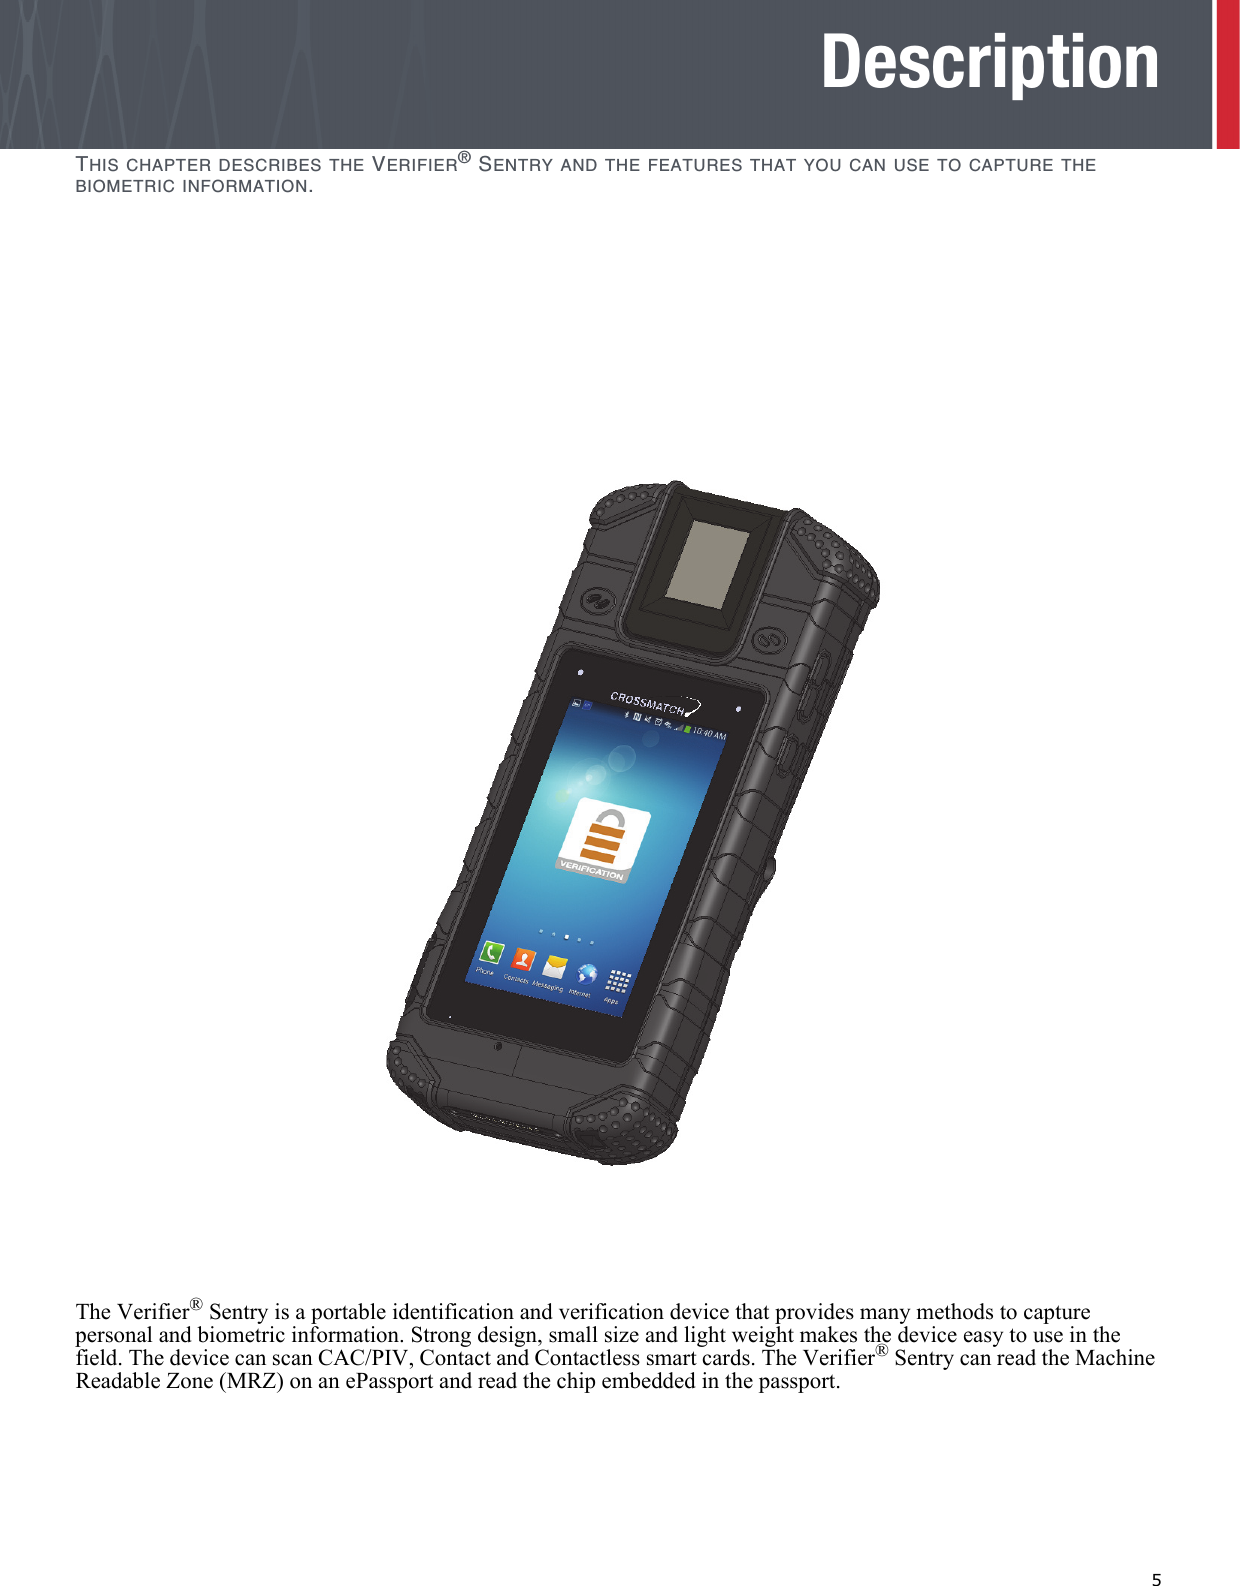   5DescriptionTHIS CHAPTER DESCRIBES THE VERIFIER® SENTRY AND THE FEATURES THAT YOU CAN USE TO CAPTURE THE BIOMETRIC INFORMATION.The Verifier® Sentry is a portable identification and verification device that provides many methods to capture personal and biometric information. Strong design, small size and light weight makes the device easy to use in the field. The device can scan CAC/PIV, Contact and Contactless smart cards. The Verifier® Sentry can read the Machine Readable Zone (MRZ) on an ePassport and read the chip embedded in the passport. 